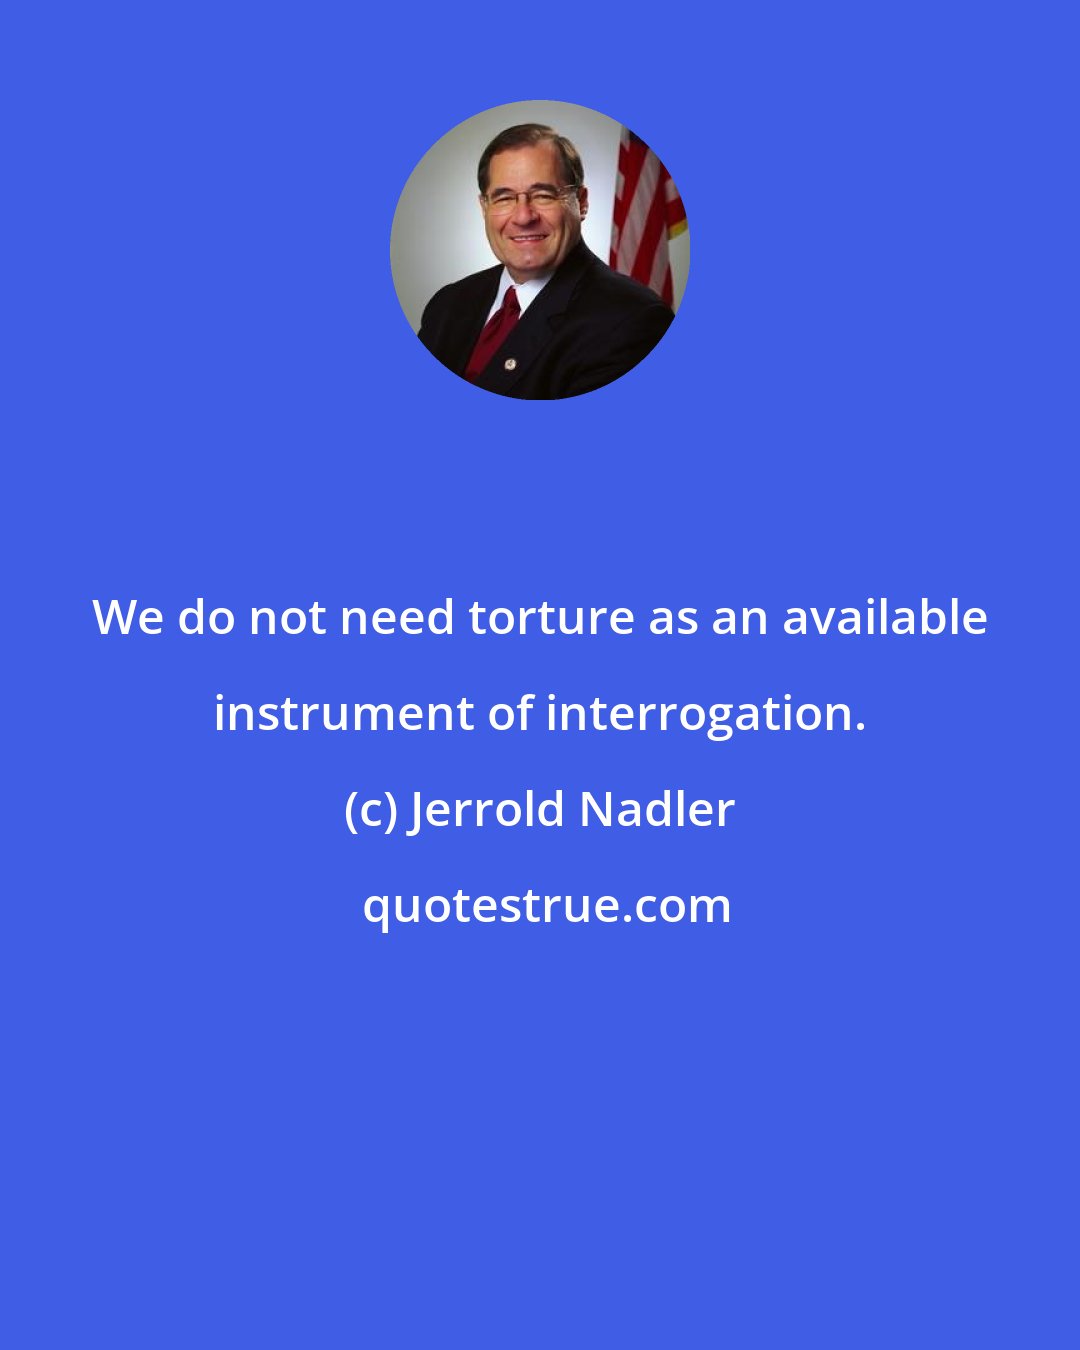 Jerrold Nadler: We do not need torture as an available instrument of interrogation.